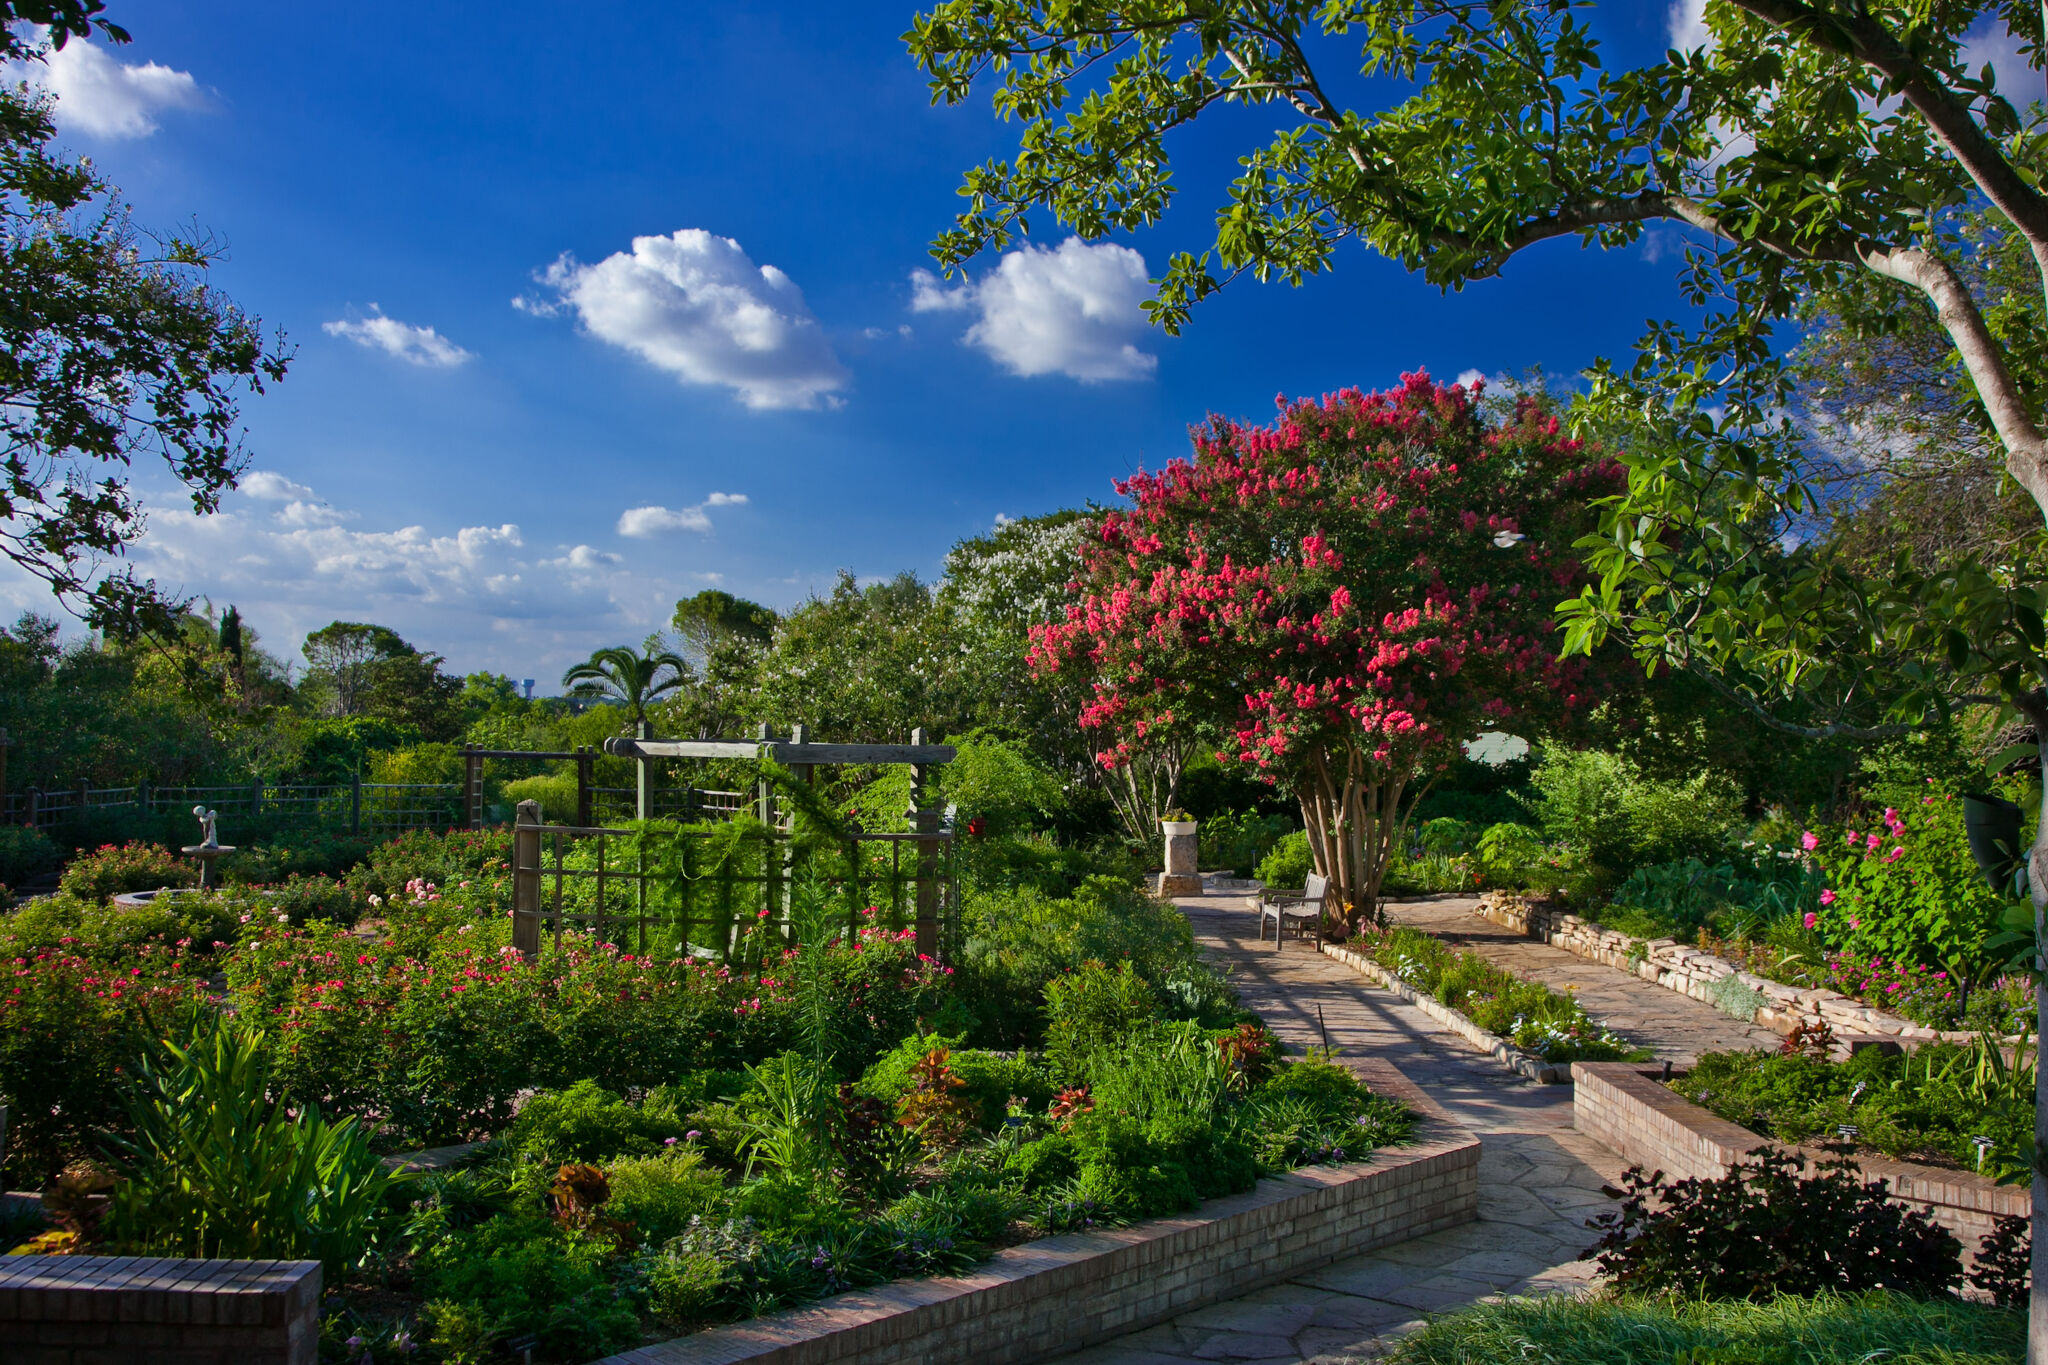 San Antonio Botanical Garden: 16 top things to see and do